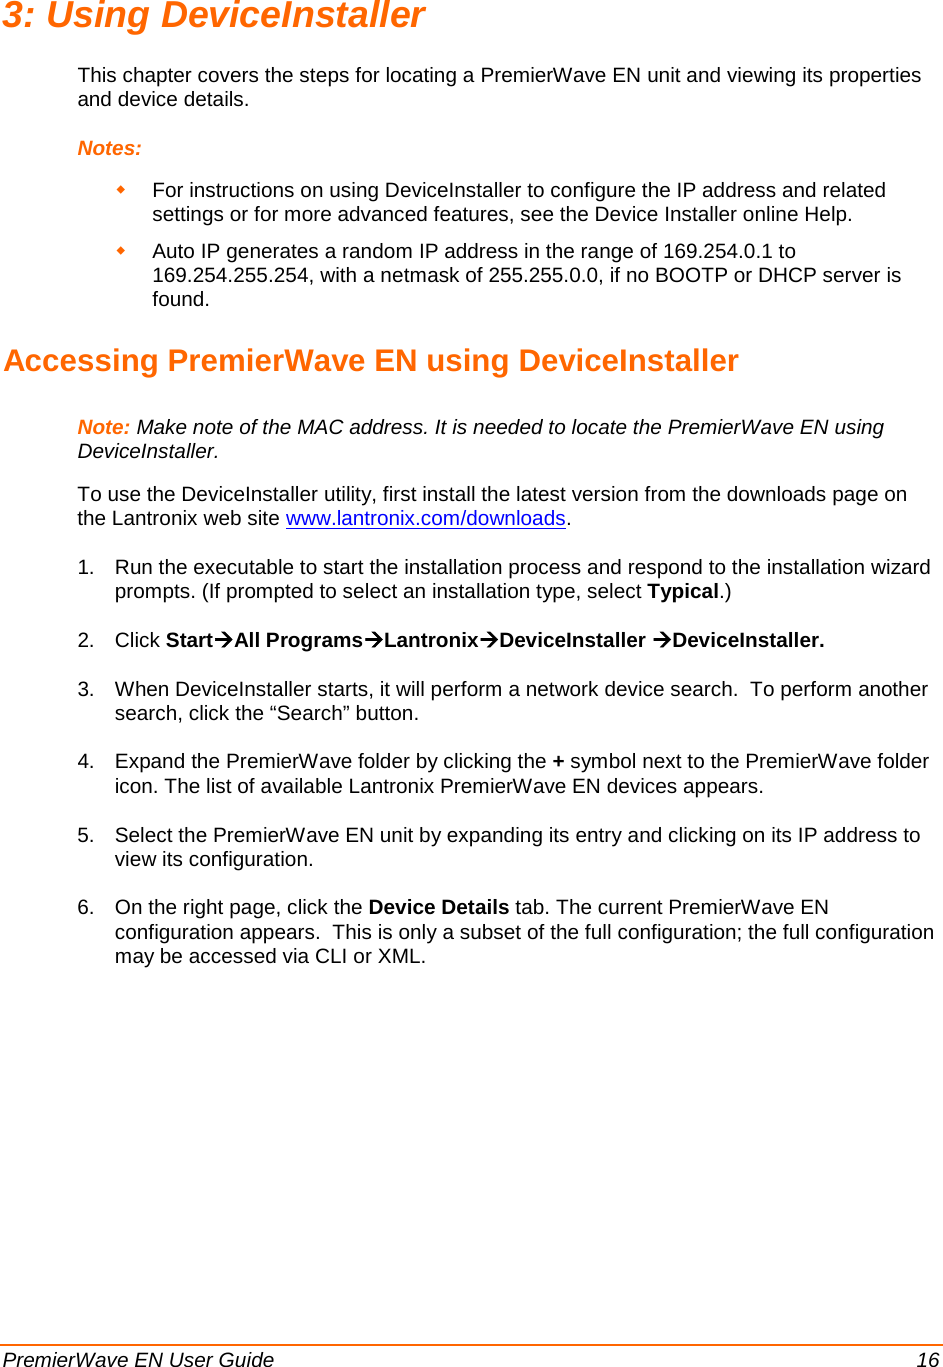  PremierWave EN User Guide    16 3: Using DeviceInstaller This chapter covers the steps for locating a PremierWave EN unit and viewing its properties and device details.  Notes:   For instructions on using DeviceInstaller to configure the IP address and related settings or for more advanced features, see the Device Installer online Help.  Auto IP generates a random IP address in the range of 169.254.0.1 to 169.254.255.254, with a netmask of 255.255.0.0, if no BOOTP or DHCP server is found. Accessing PremierWave EN using DeviceInstaller Note: Make note of the MAC address. It is needed to locate the PremierWave EN using DeviceInstaller.  To use the DeviceInstaller utility, first install the latest version from the downloads page on the Lantronix web site www.lantronix.com/downloads. 1. Run the executable to start the installation process and respond to the installation wizard prompts. (If prompted to select an installation type, select Typical.) 2. Click StartAll ProgramsLantronixDeviceInstaller DeviceInstaller. 3. When DeviceInstaller starts, it will perform a network device search.  To perform another search, click the “Search” button. 4. Expand the PremierWave folder by clicking the + symbol next to the PremierWave folder icon. The list of available Lantronix PremierWave EN devices appears. 5. Select the PremierWave EN unit by expanding its entry and clicking on its IP address to view its configuration. 6. On the right page, click the Device Details tab. The current PremierWave EN configuration appears.  This is only a subset of the full configuration; the full configuration may be accessed via CLI or XML.  